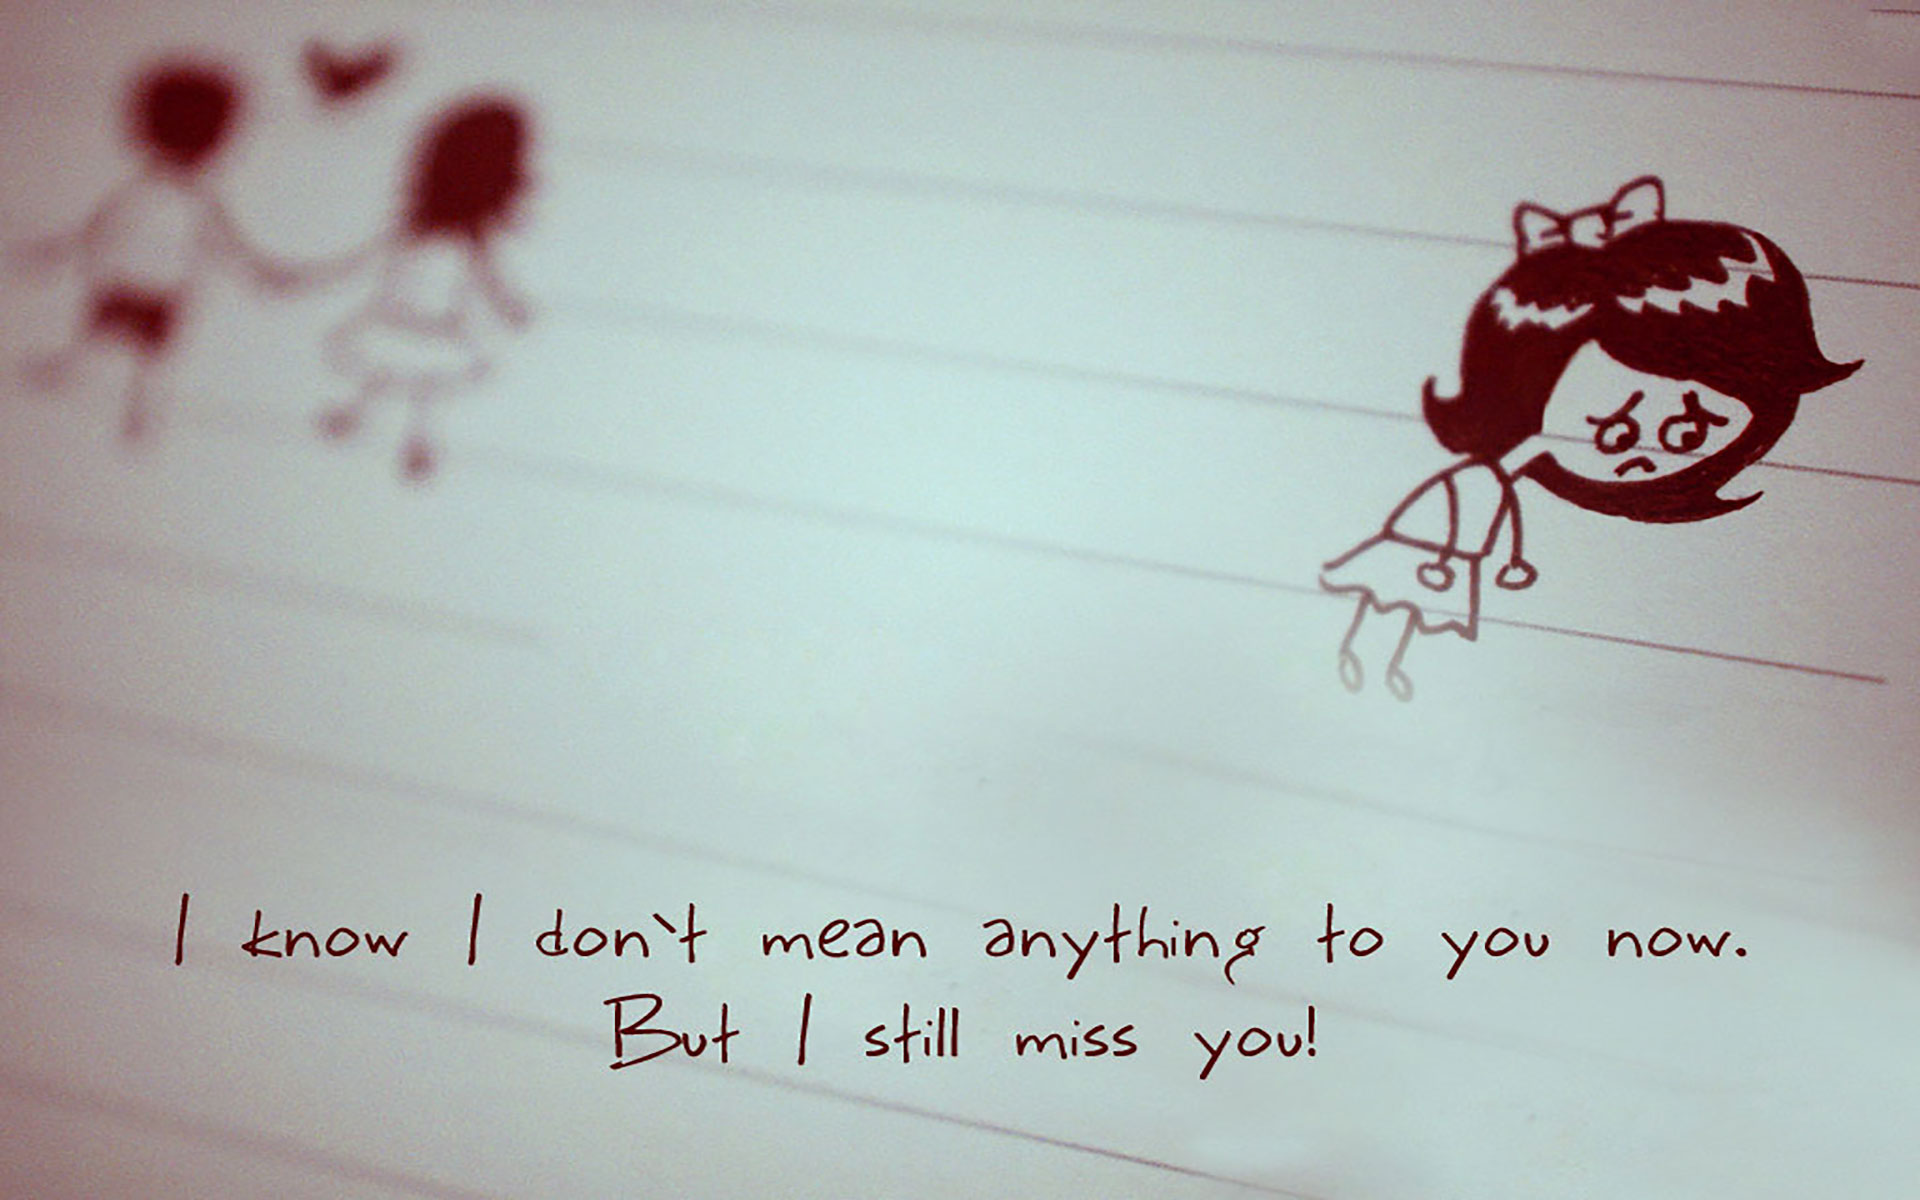 HD I Miss You Wallpaper for him or her Romantic Wallpapers Chobirdokan